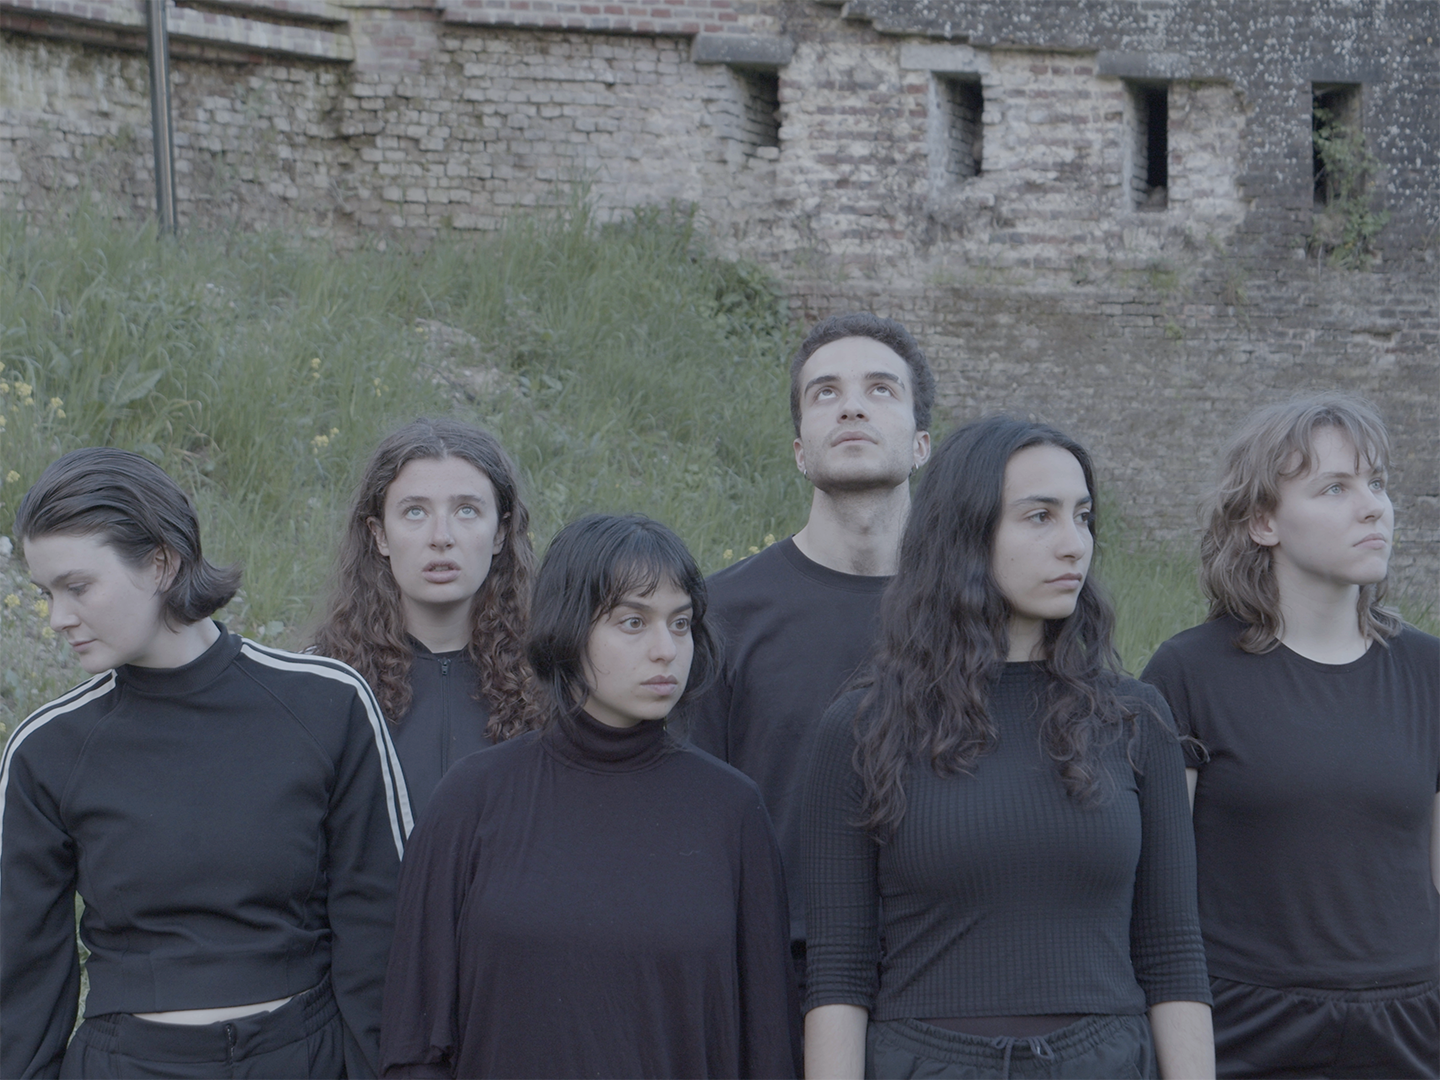 A film still of 6 people dressed in all black, arranged loosely in rows. All people are looking in different directions. The background is a grassy verge in front of a medieval fort built of brick.